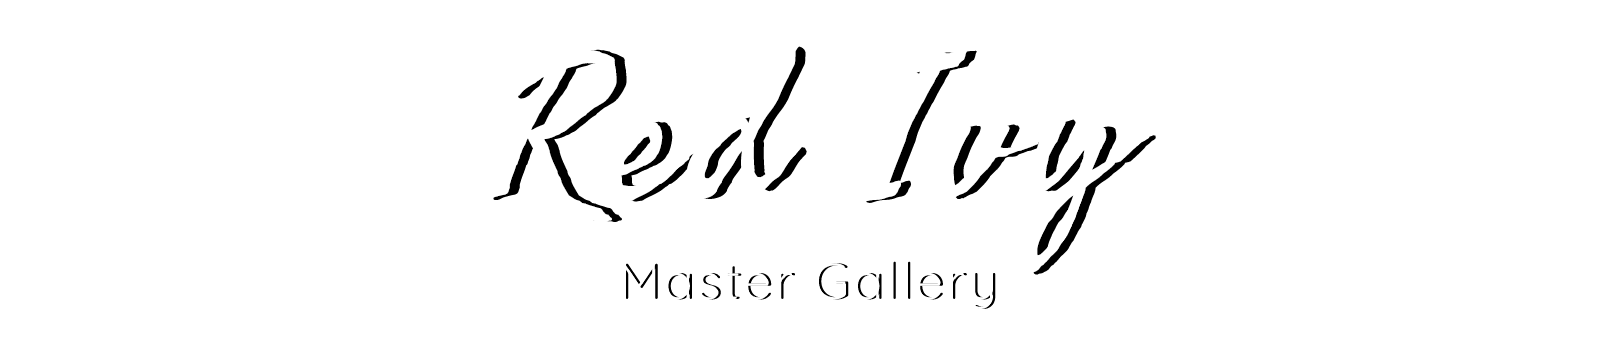 Red Ivy Master Gallery